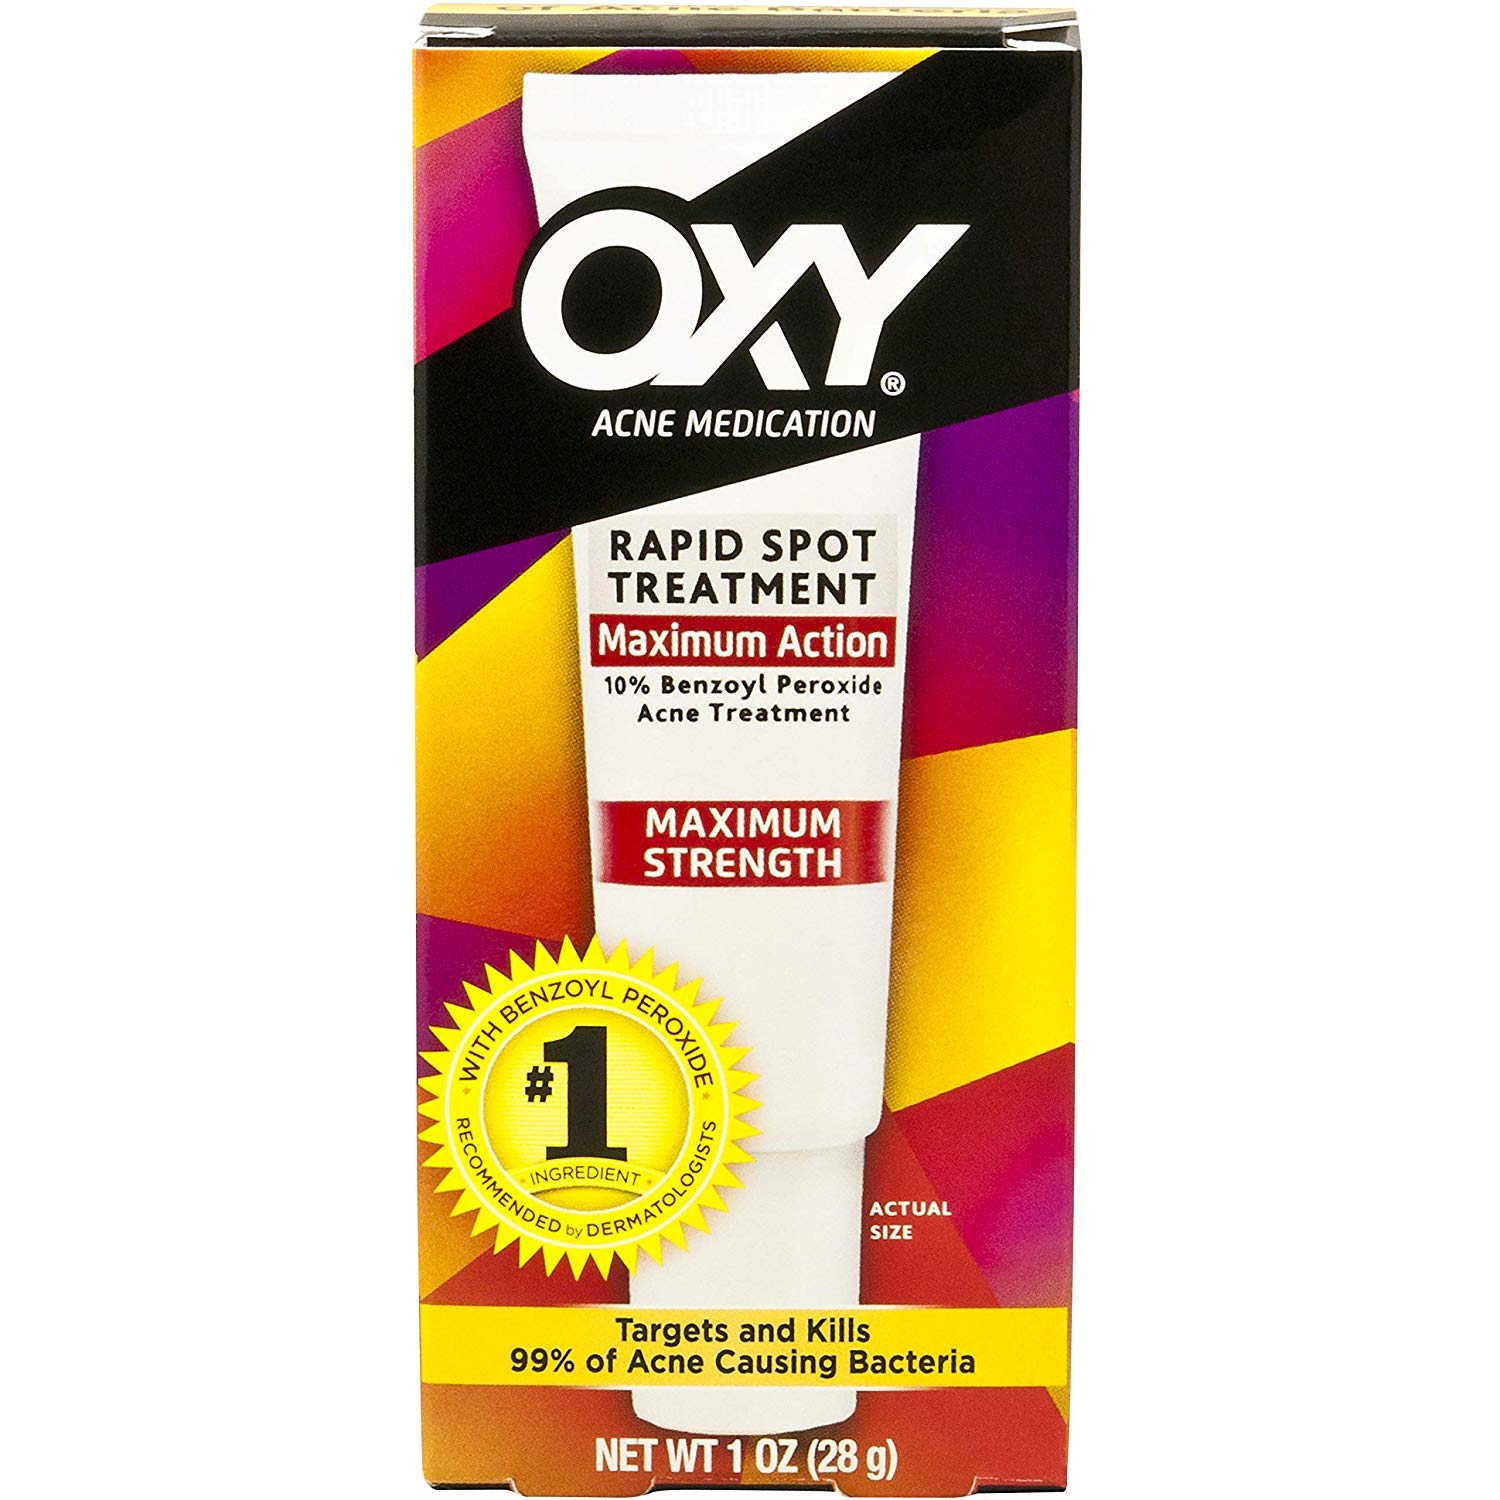 How to Use Oxy Acne Medication